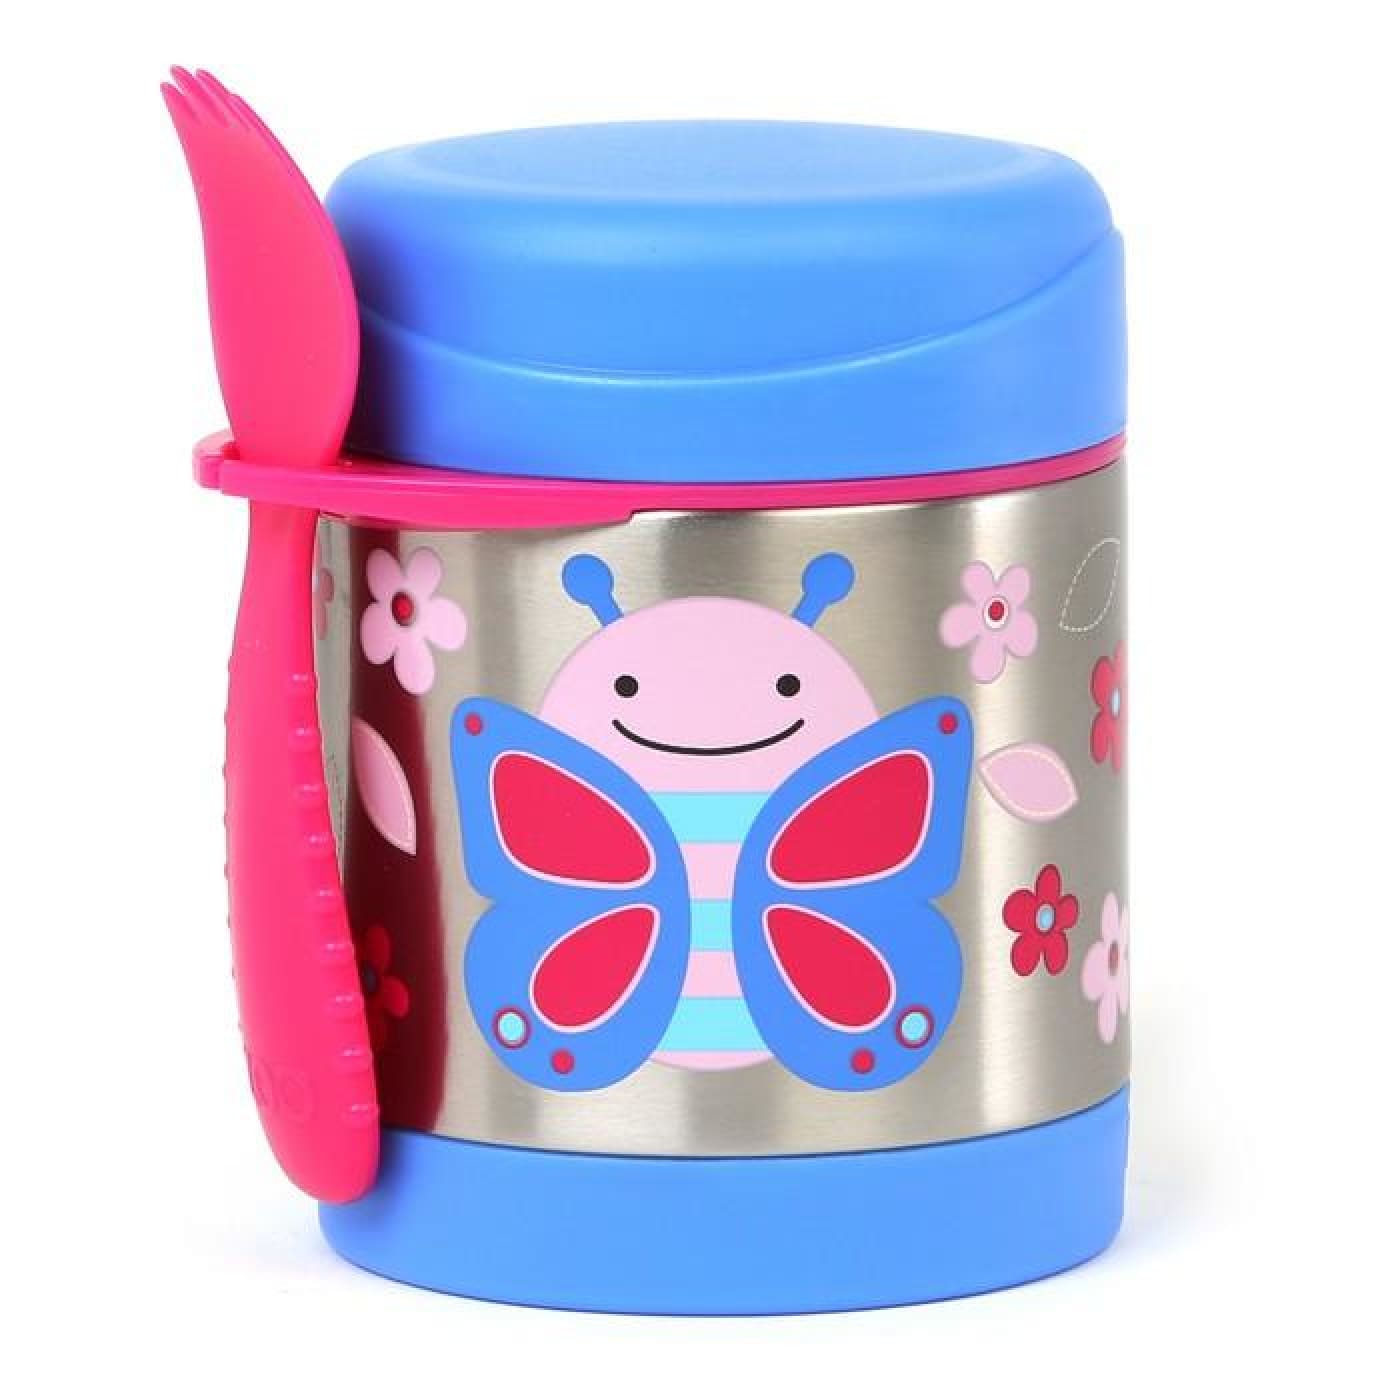 Skip Hop Zoo Insulated Food Jar - Butterfly - NURSING & FEEDING - CONTAINERS/FEEDERS